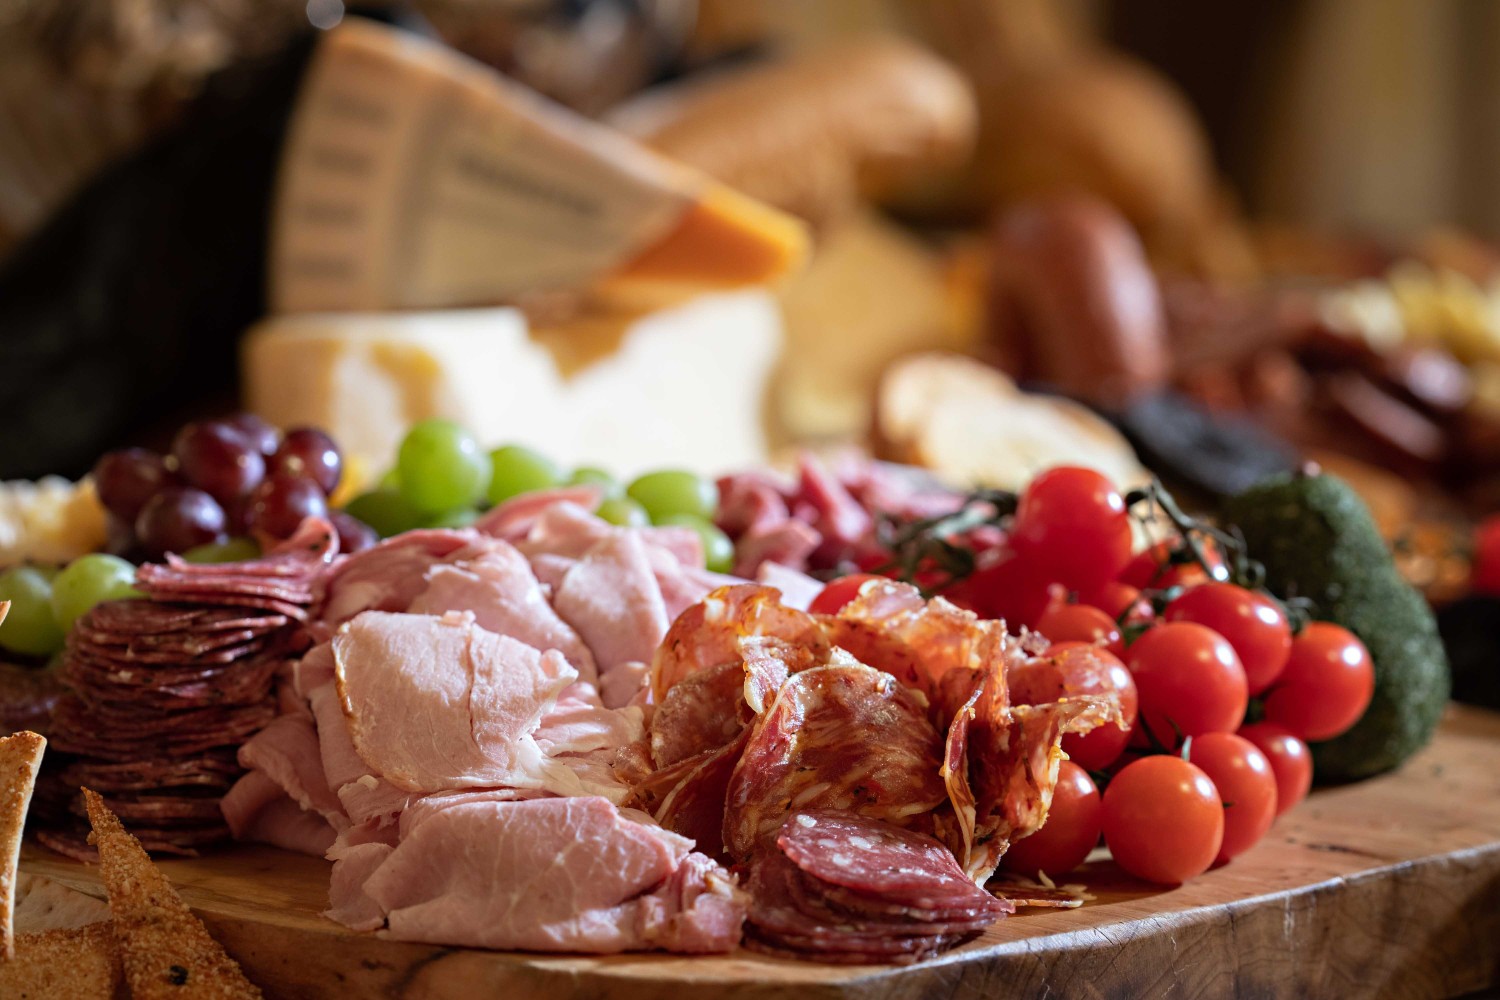 Amway Grand_Banquet Charcuterie Board_Meat_Cheese_Grapes_Tomatoes_Bread_Crackers